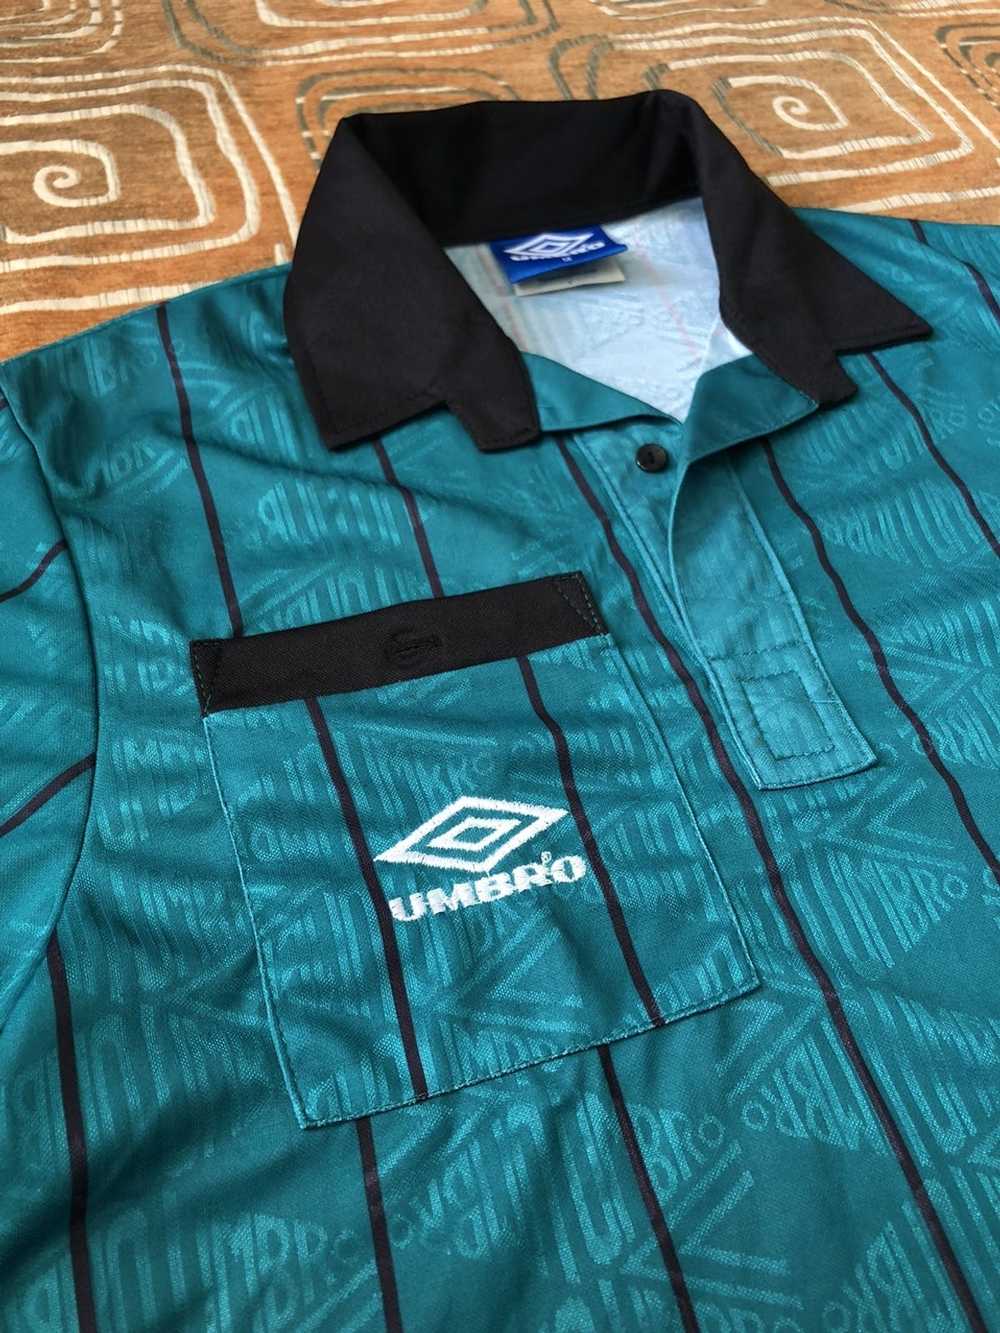 Umbro × Vintage Umbro vintage Jersey/Polo made in… - image 4